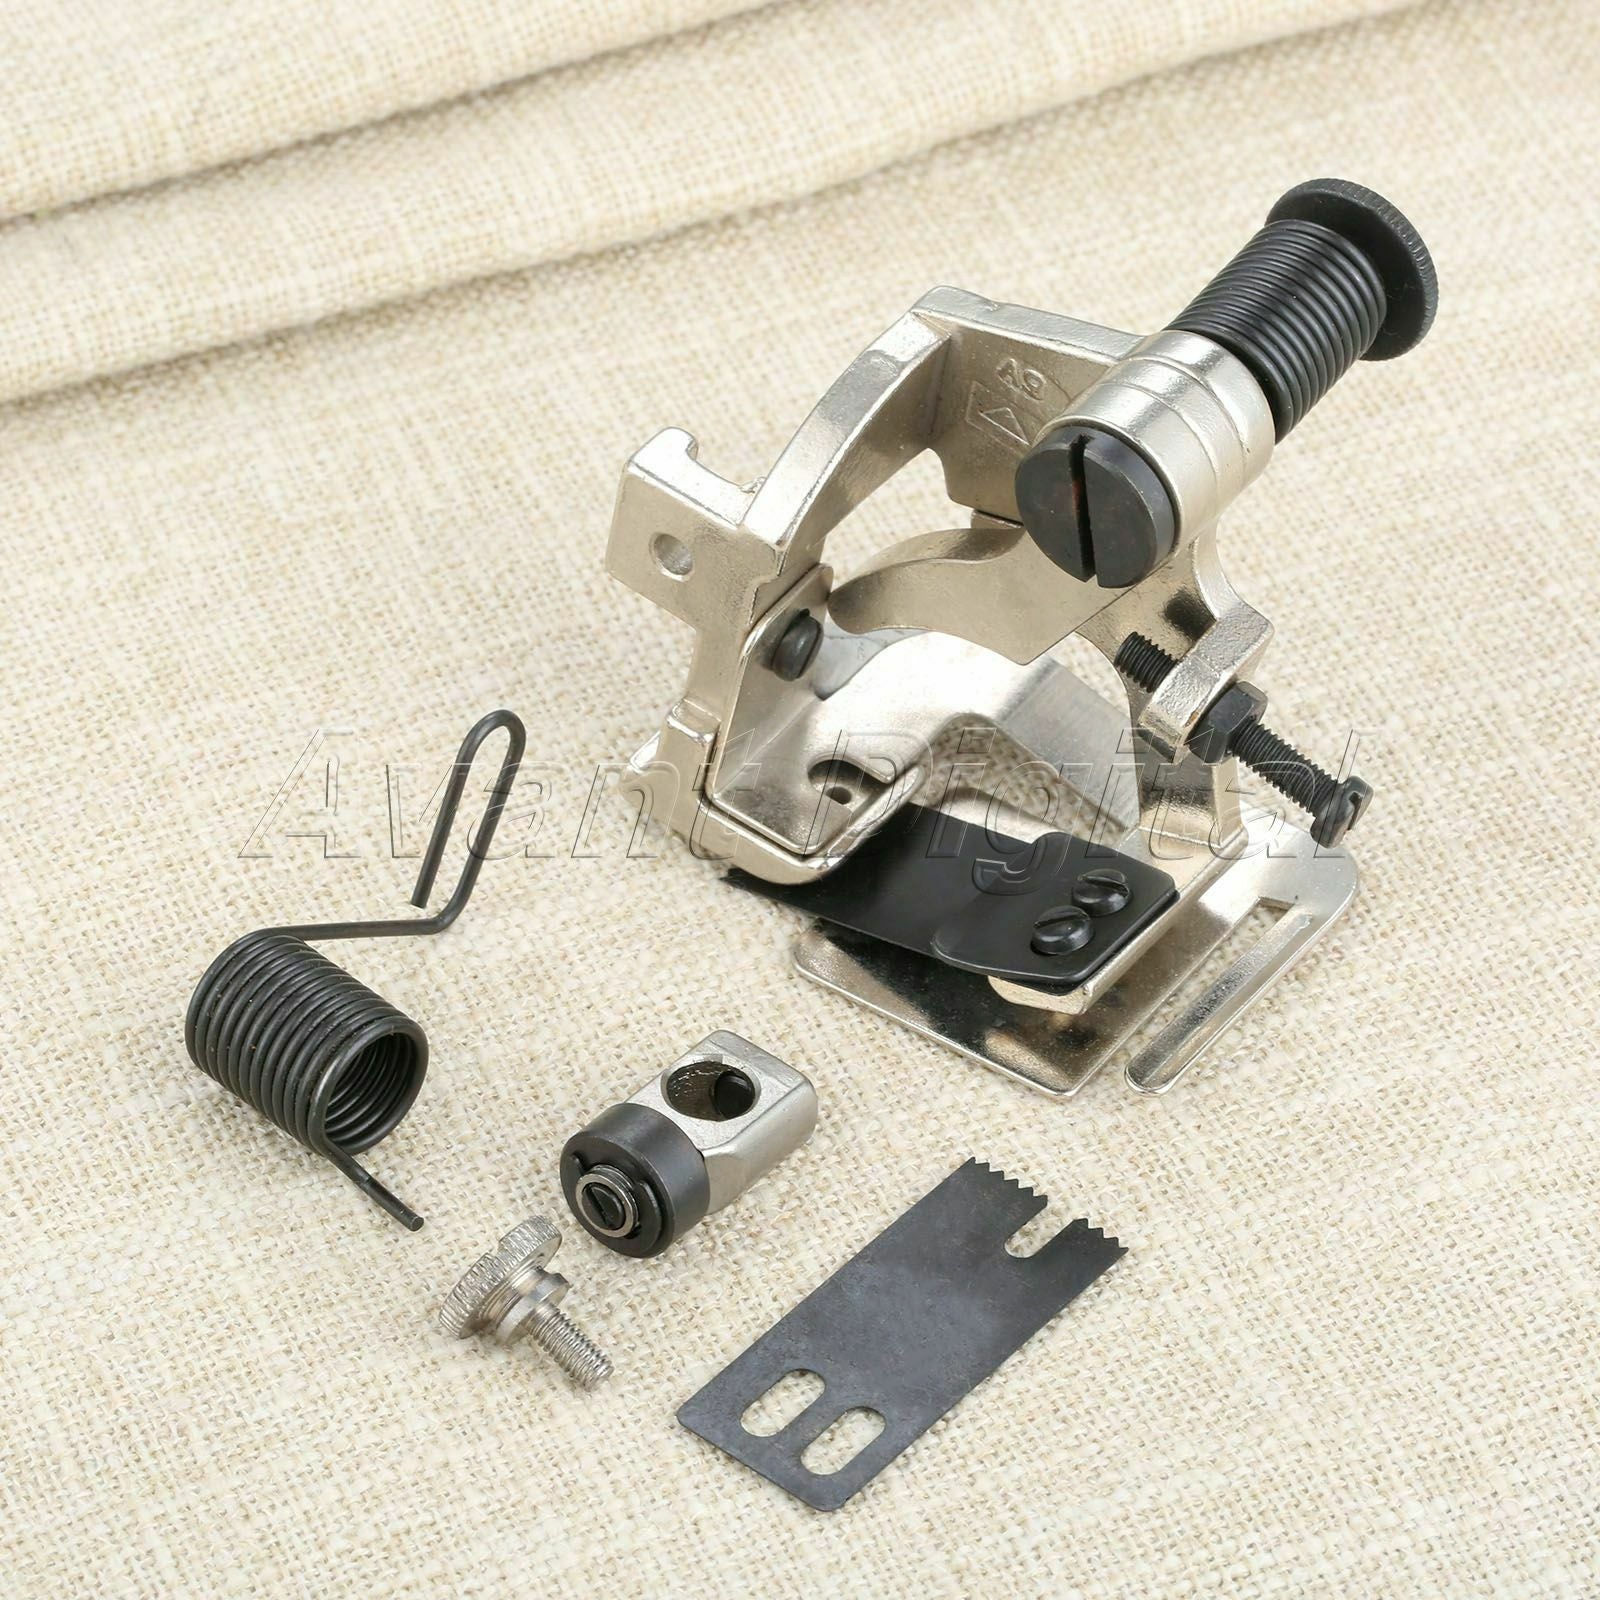 1pc A9 (G9E) Attachment Foot For Juki Brother Singer Industrial Sewing Machine